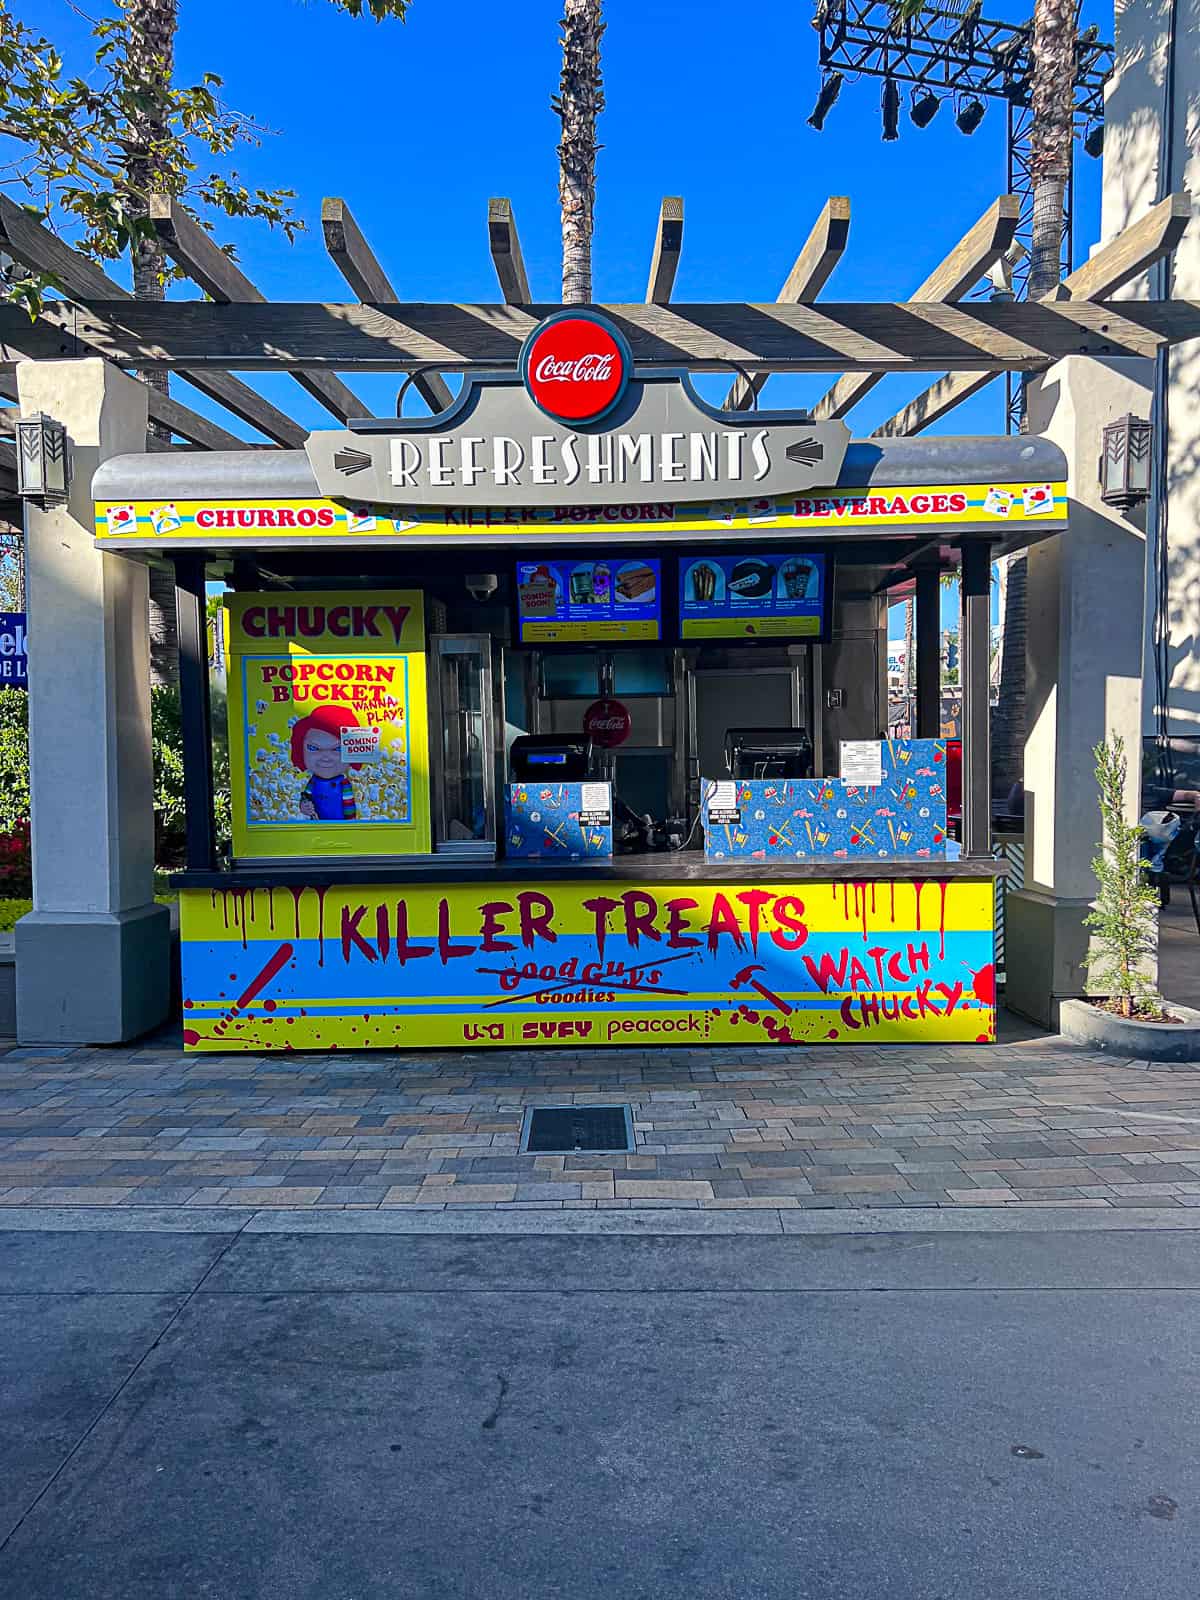 Universal Studios Chucky Popcorn Bucket Concession Stand for Halloween Party Event